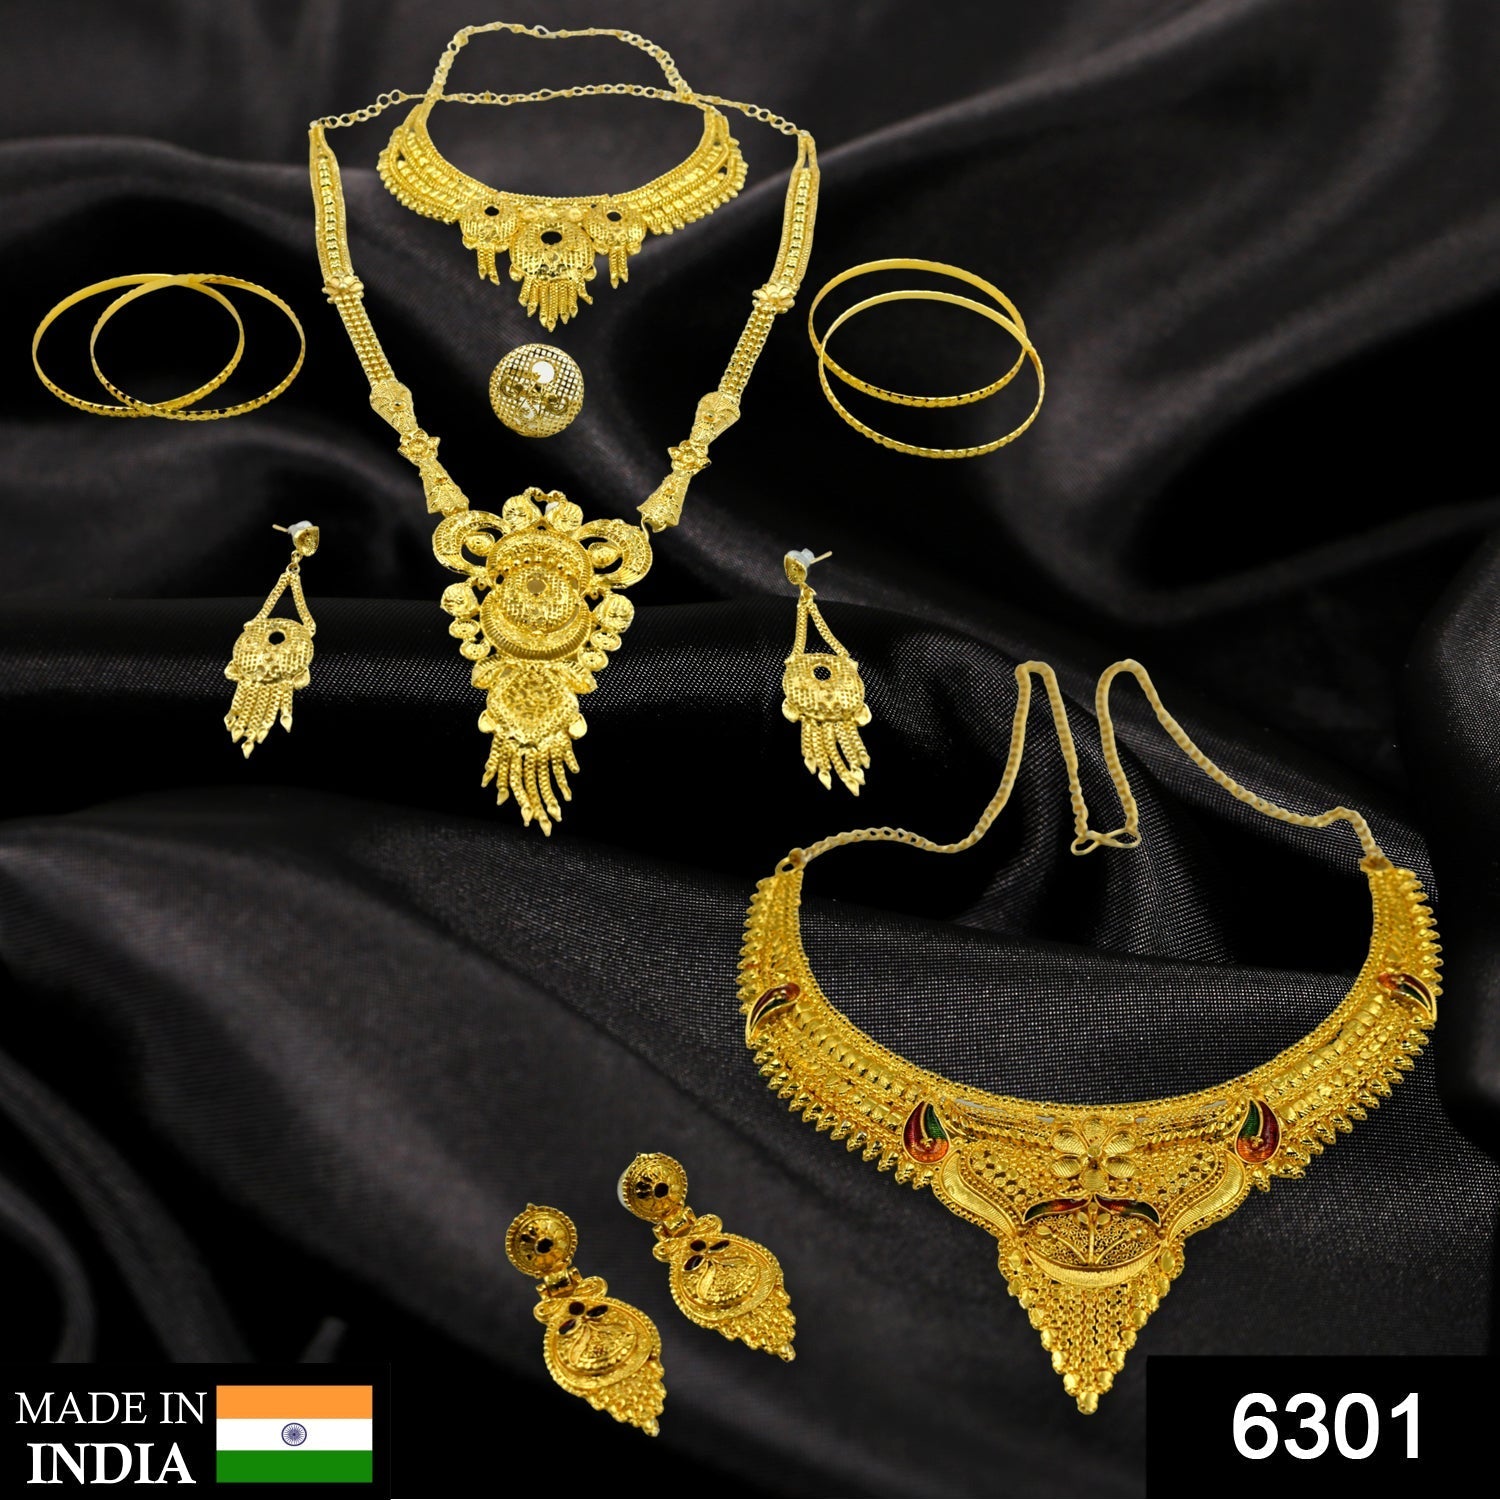 6301 Bridal Jewellery Set and collection for bridal attire and outlook purposes.